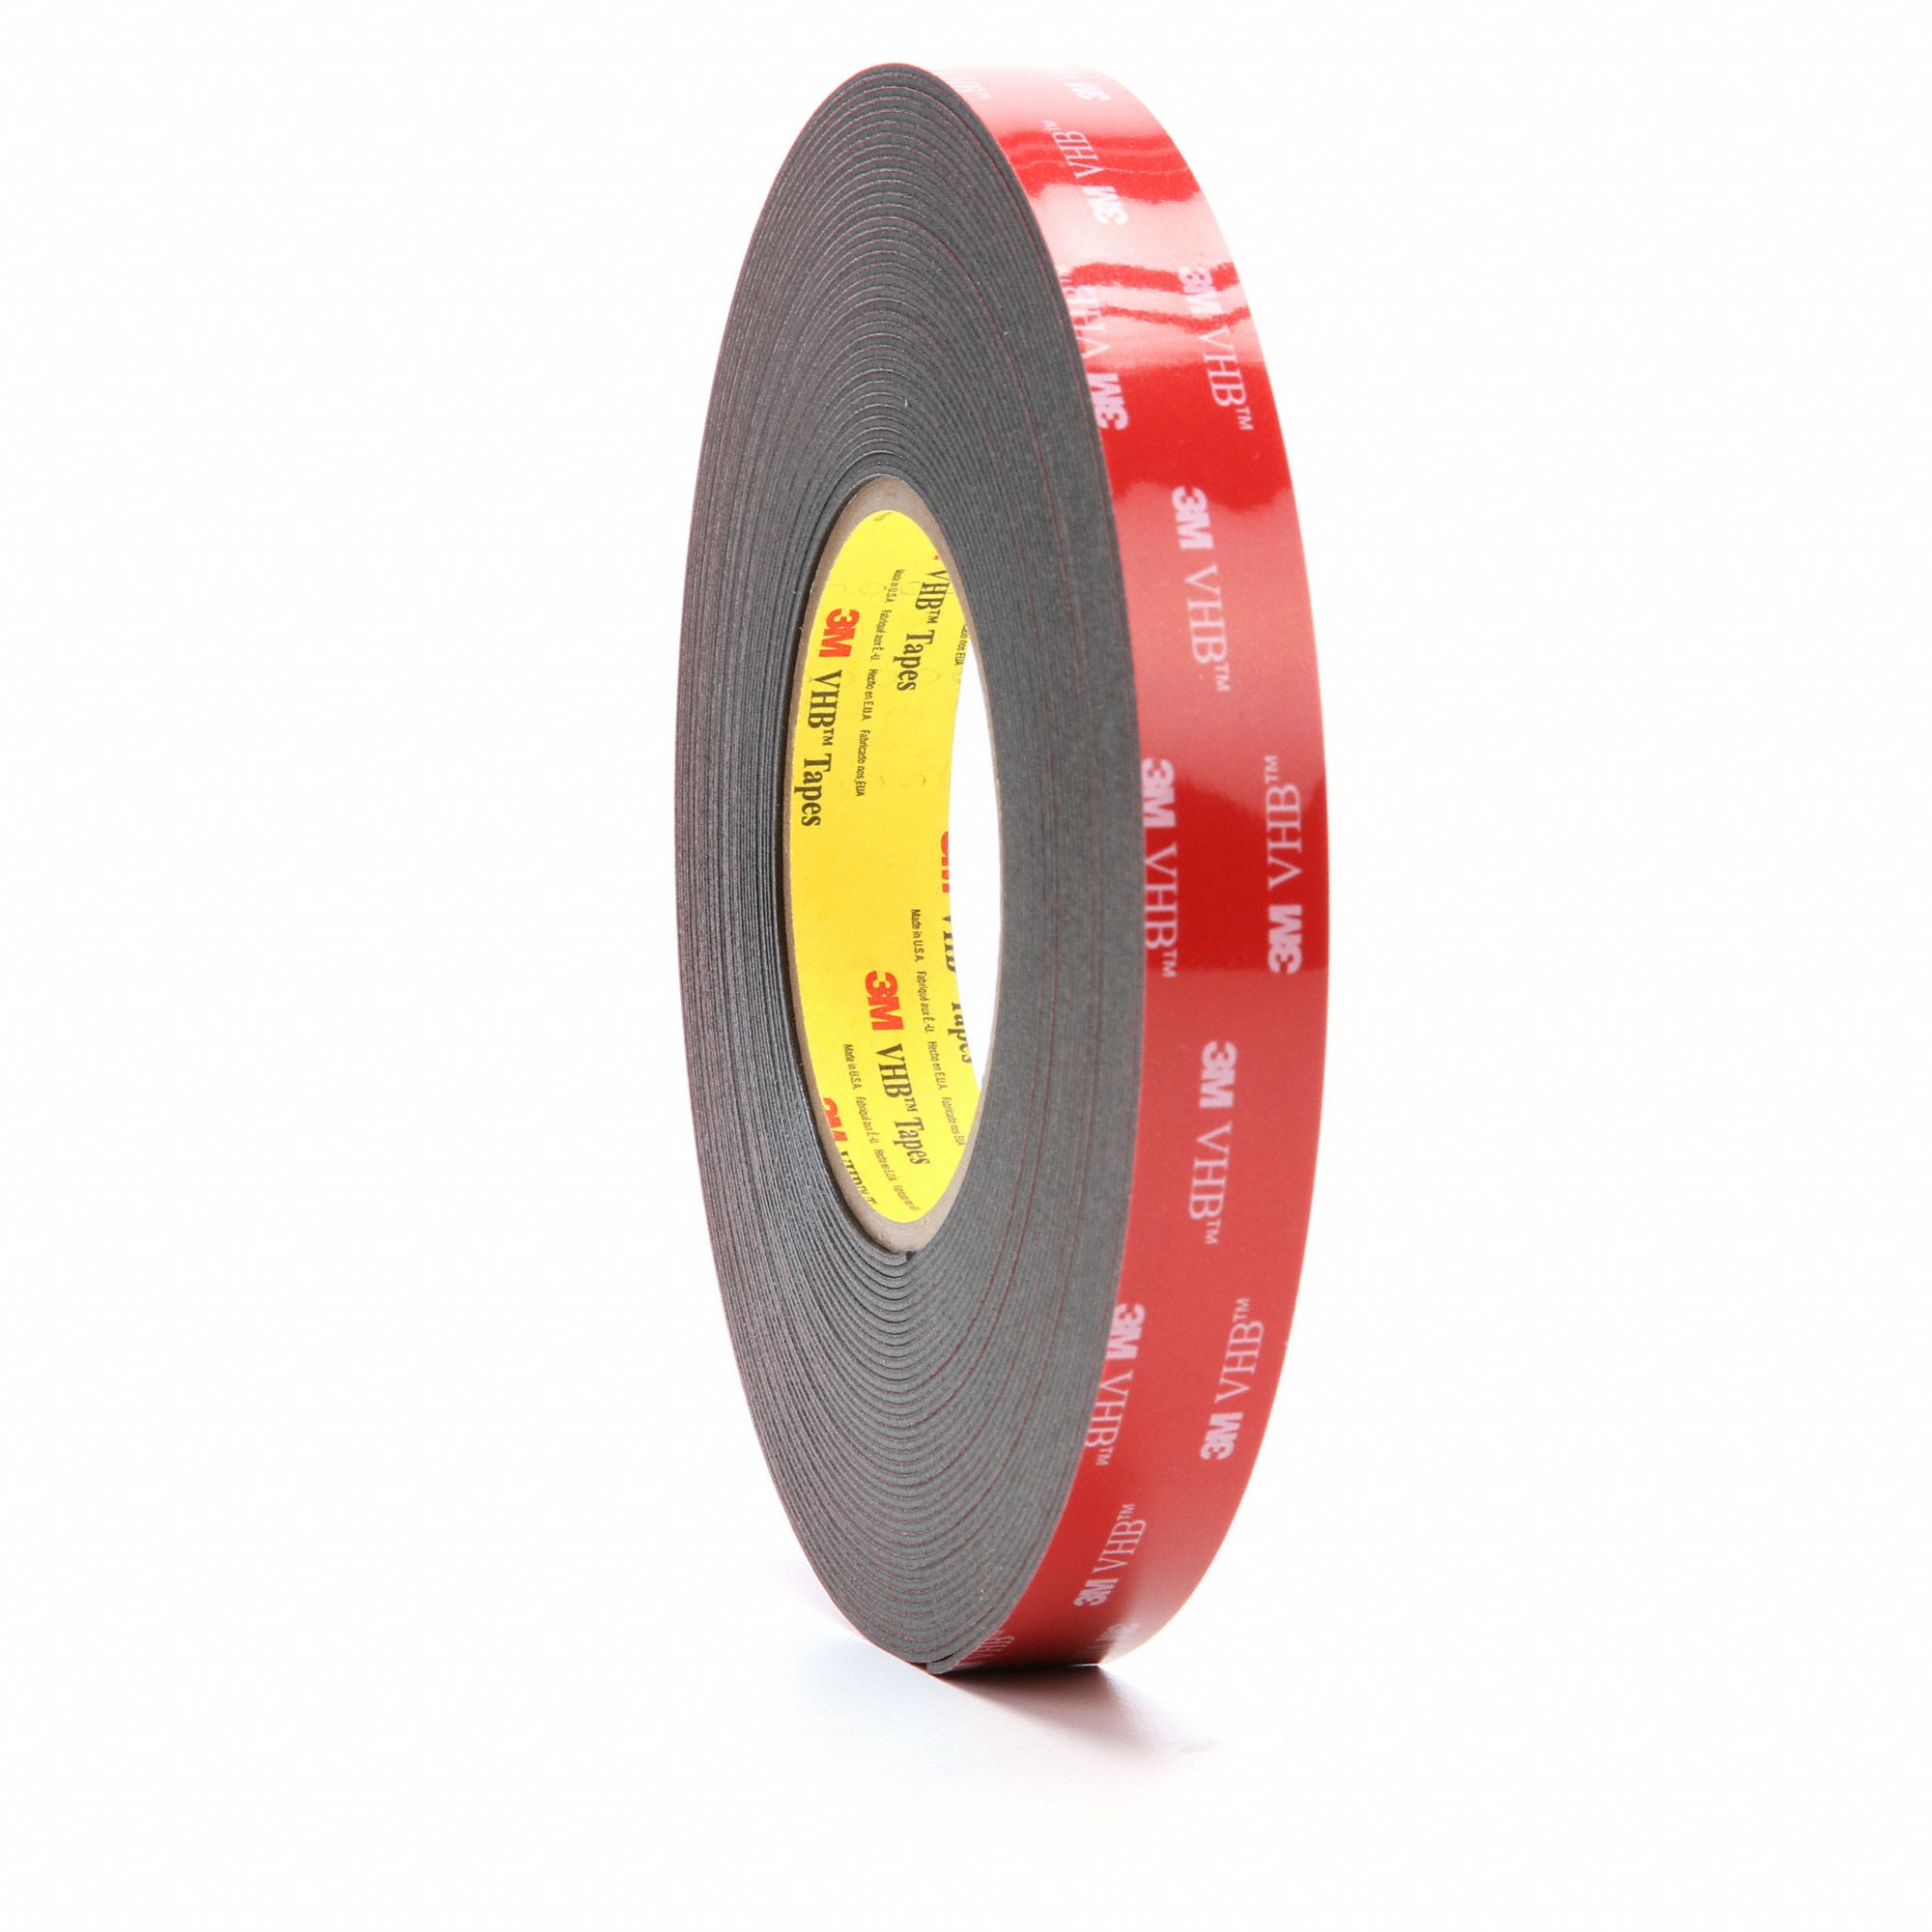 3m Vhb 5952 Double Sided Adhesive Tape  Double Sided Tape 3m Vhb 4972 - 3m  Double - Aliexpress